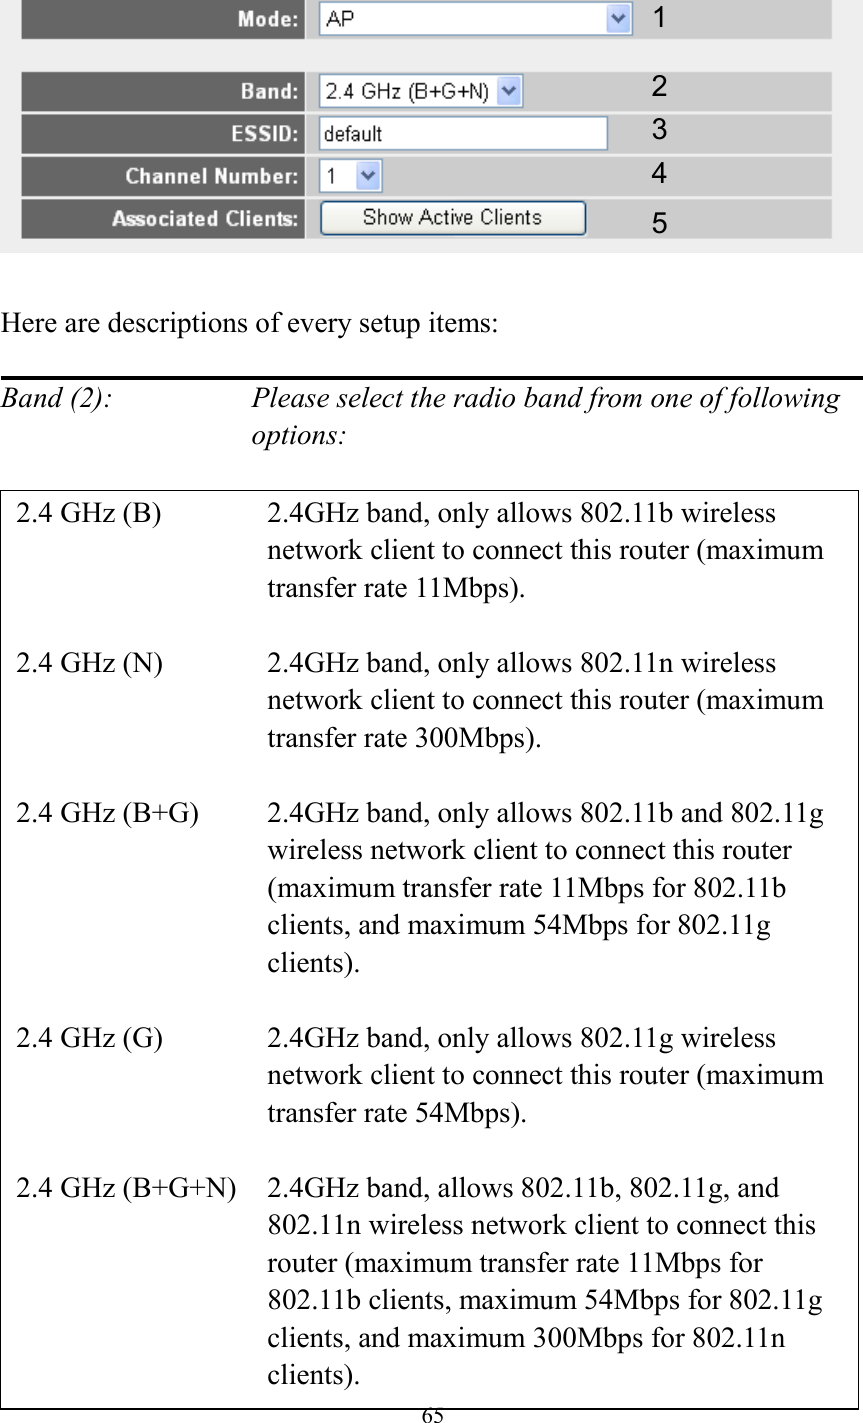 65    Here are descriptions of every setup items:  Band (2):    Please select the radio band from one of following options:                         1 2 3 4 2.4 GHz (B)  2.4GHz band, only allows 802.11b wireless network client to connect this router (maximum transfer rate 11Mbps).  2.4 GHz (N)  2.4GHz band, only allows 802.11n wireless network client to connect this router (maximum transfer rate 300Mbps).  2.4 GHz (B+G)    2.4GHz band, only allows 802.11b and 802.11g wireless network client to connect this router (maximum transfer rate 11Mbps for 802.11b clients, and maximum 54Mbps for 802.11g clients).  2.4 GHz (G)    2.4GHz band, only allows 802.11g wireless network client to connect this router (maximum transfer rate 54Mbps).  2.4 GHz (B+G+N)    2.4GHz band, allows 802.11b, 802.11g, and 802.11n wireless network client to connect this router (maximum transfer rate 11Mbps for 802.11b clients, maximum 54Mbps for 802.11g clients, and maximum 300Mbps for 802.11n clients).   5 